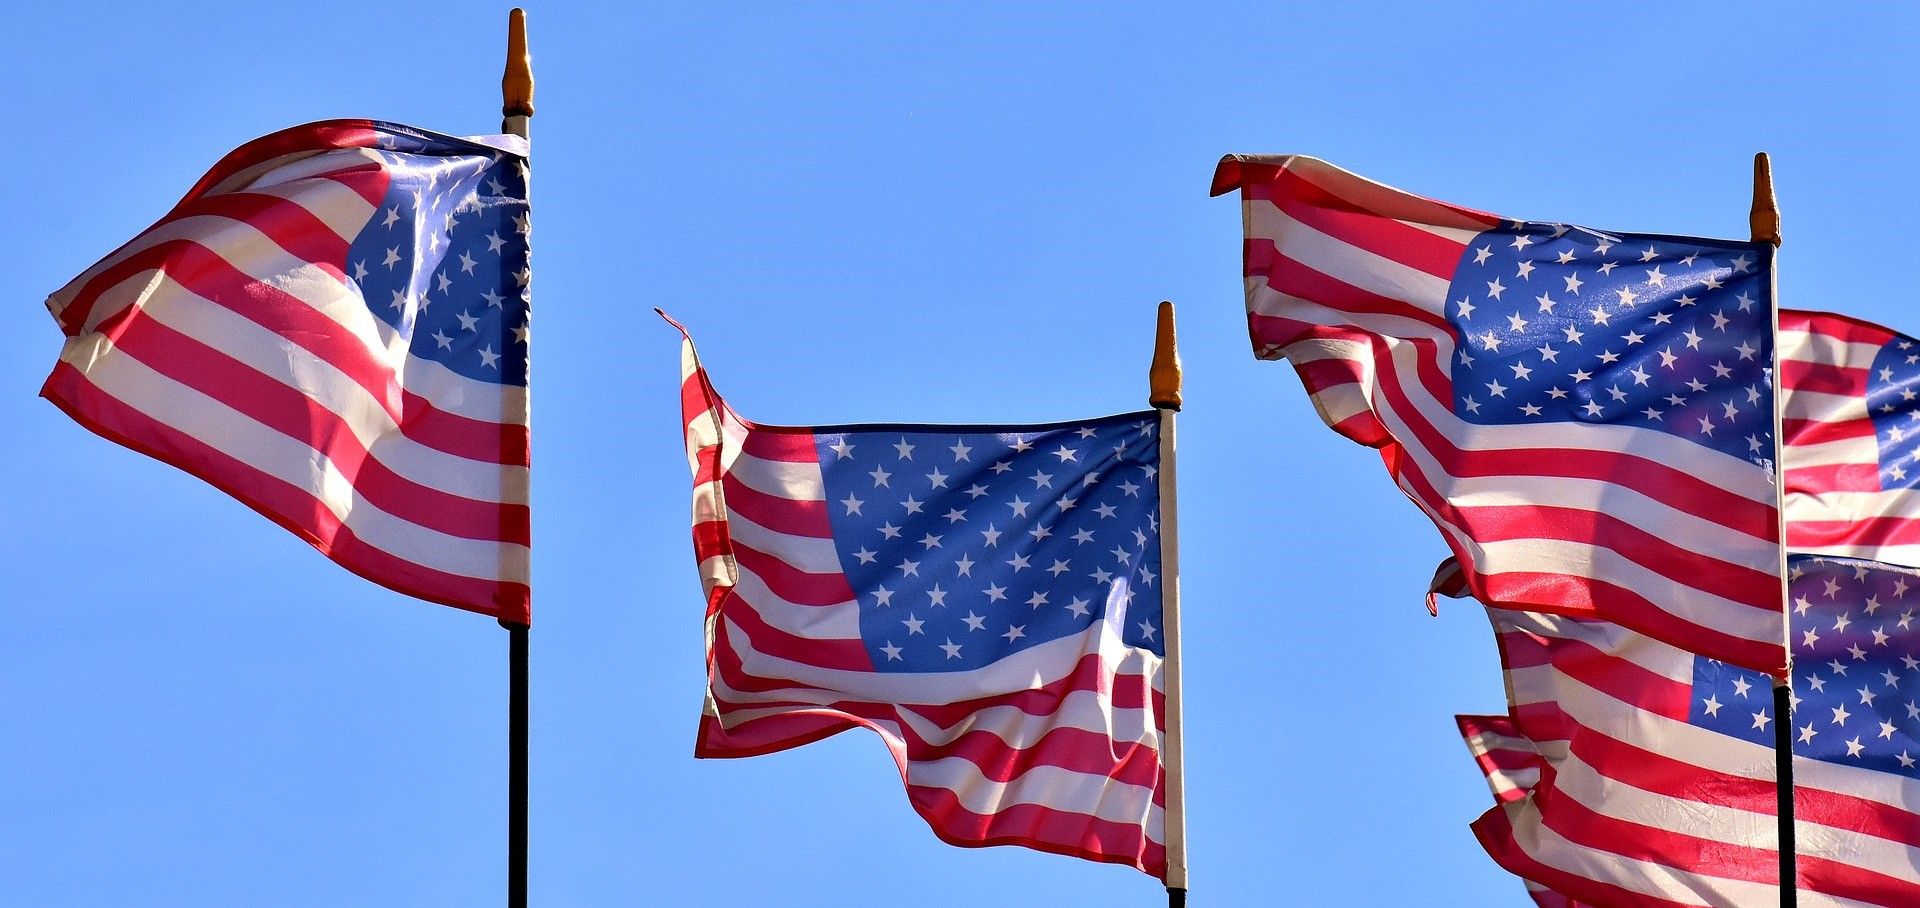 American flags blowing in wind with blue sky in the background 